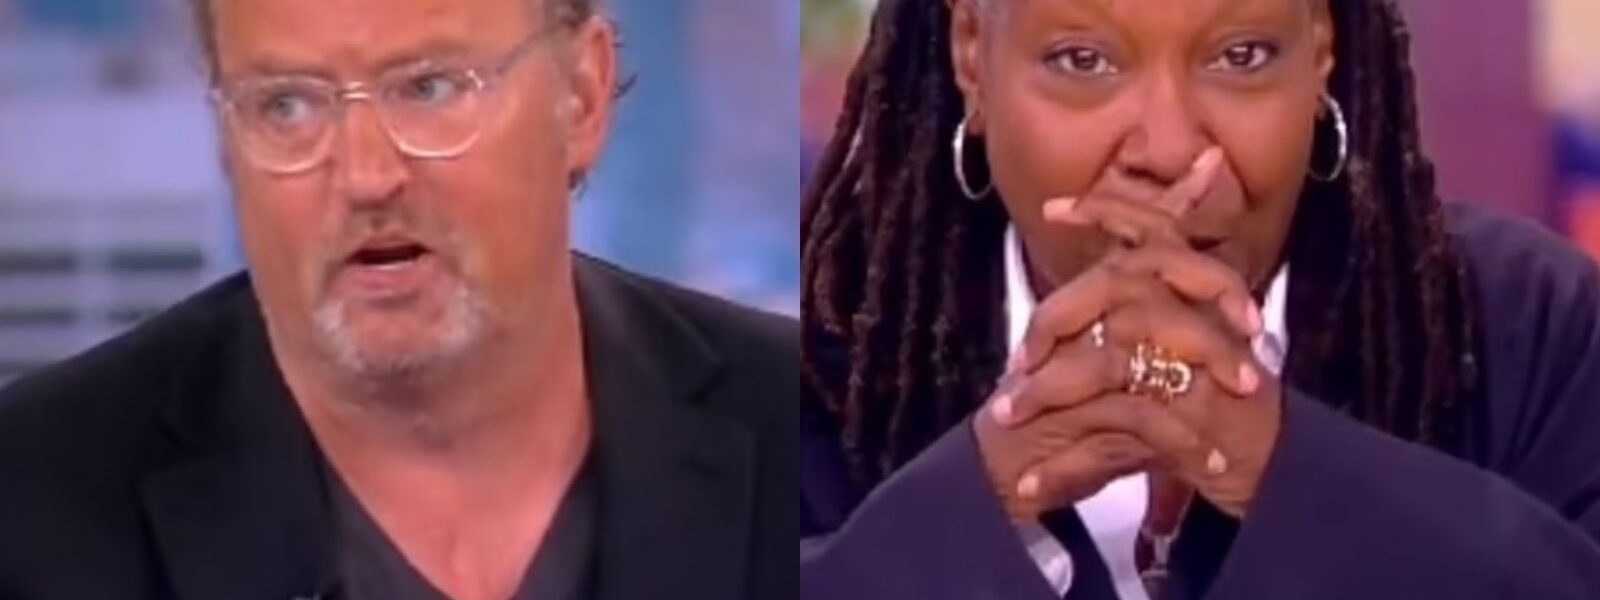 Whoopi Goldberg fights back tears as The View pays emotional tribute to Matthew Perry following his shock death - while recalling his wish to be 'remembered for helping people'